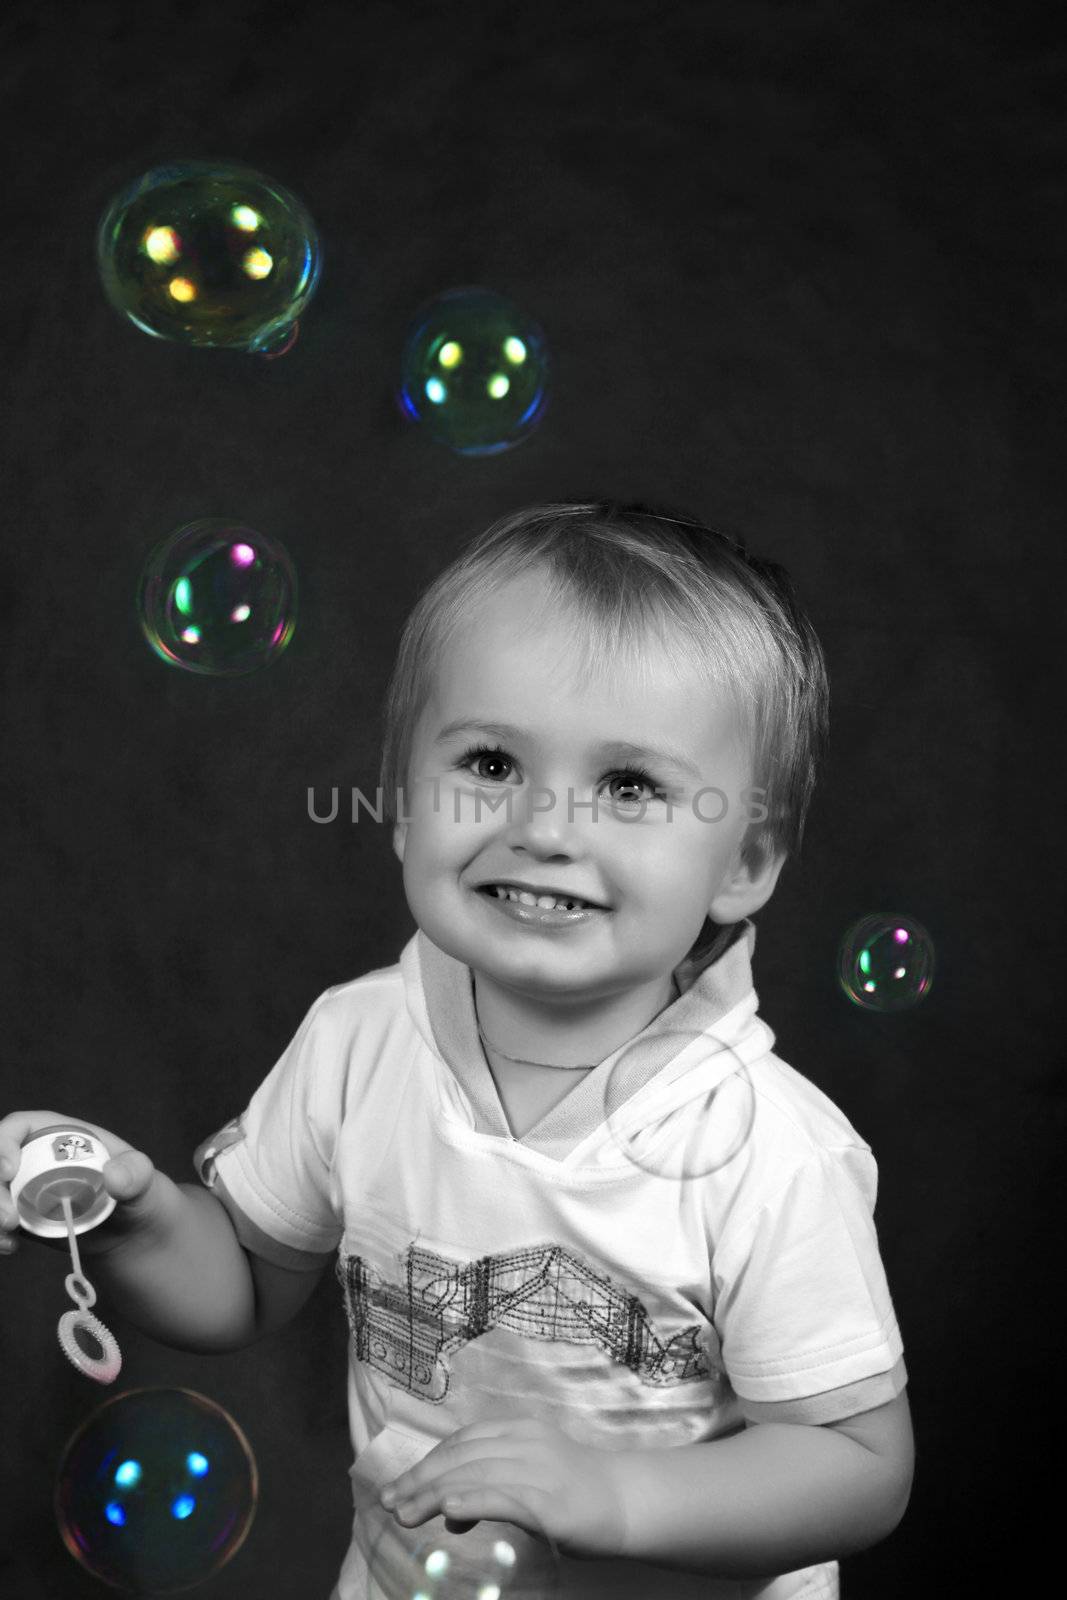 The small boy with soap bubbles in studio